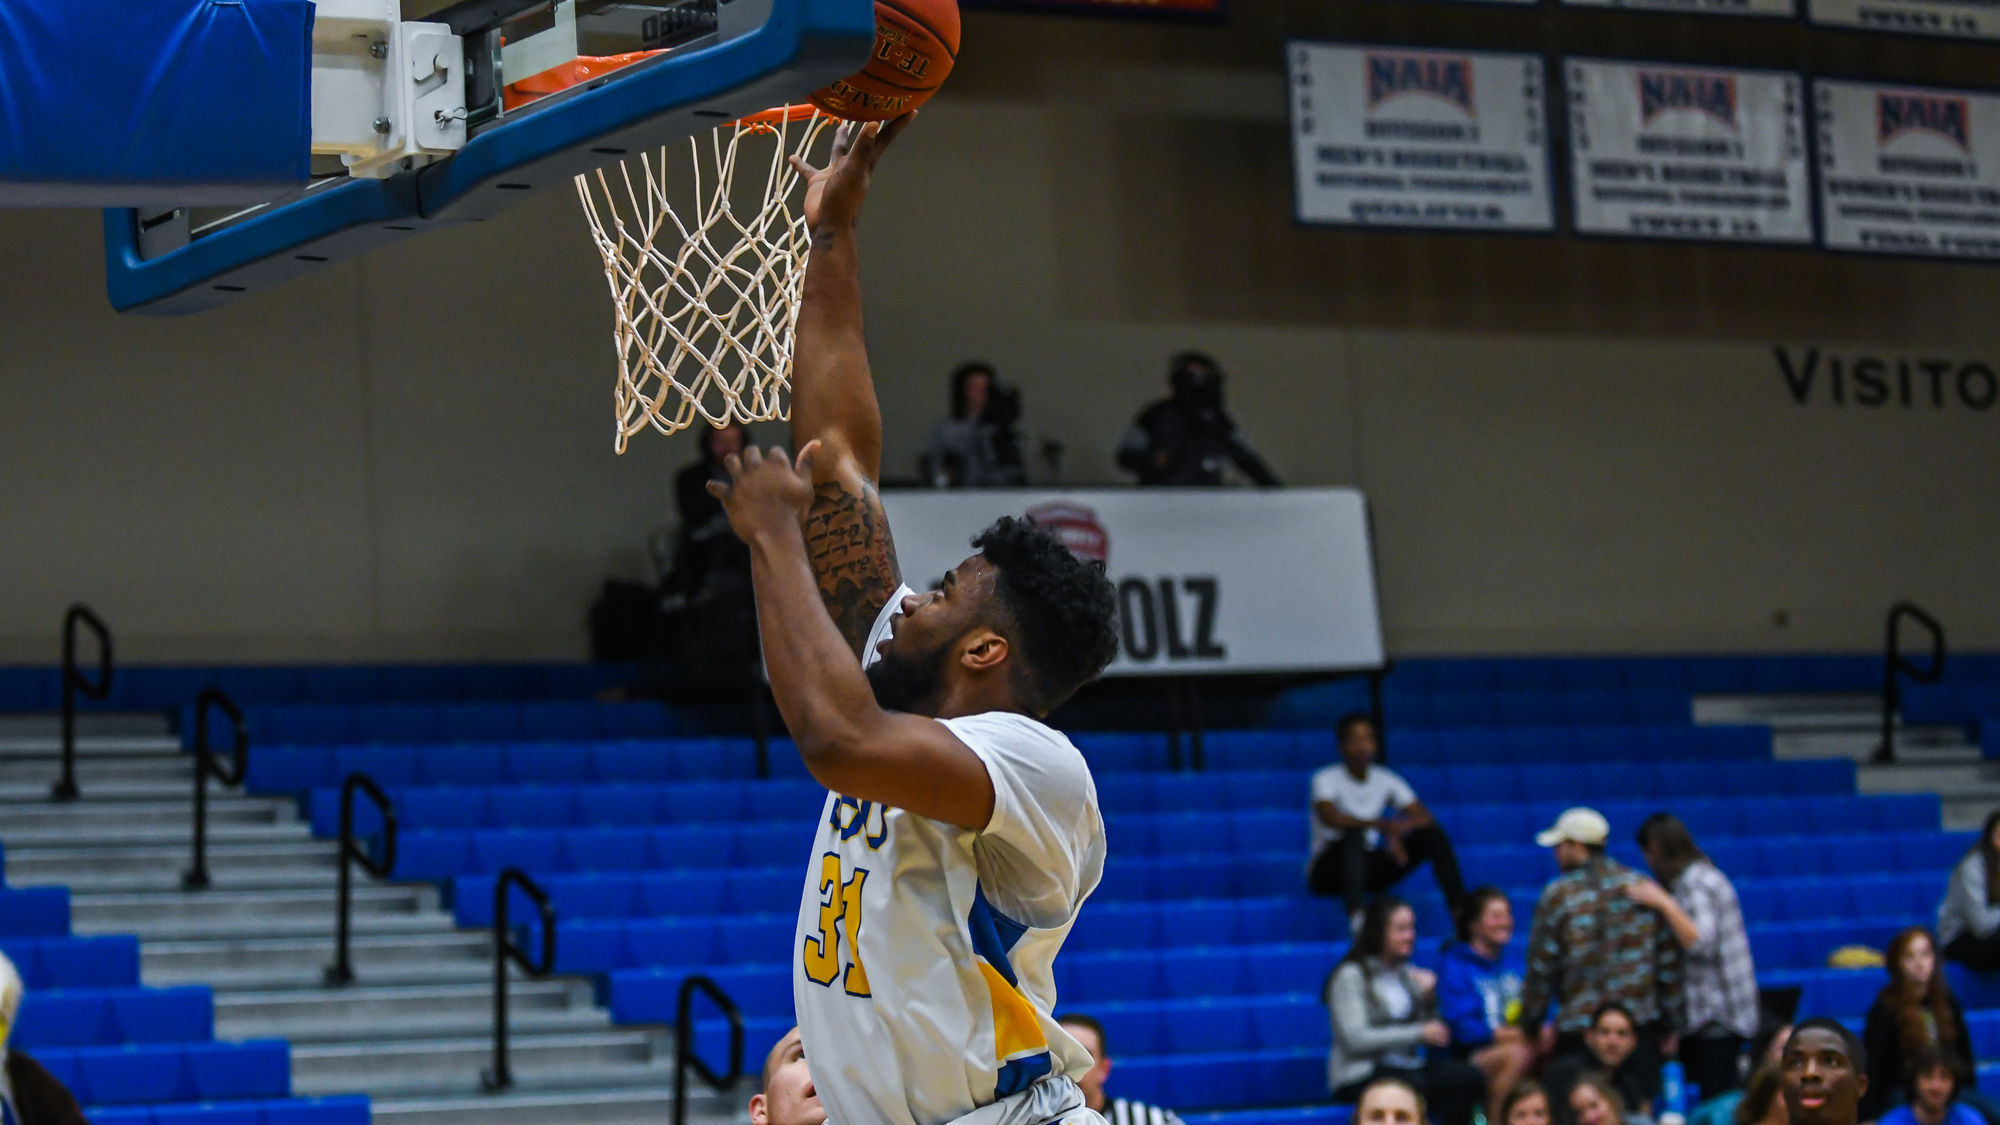 Key free throws cost men’s basketball against Bobcats